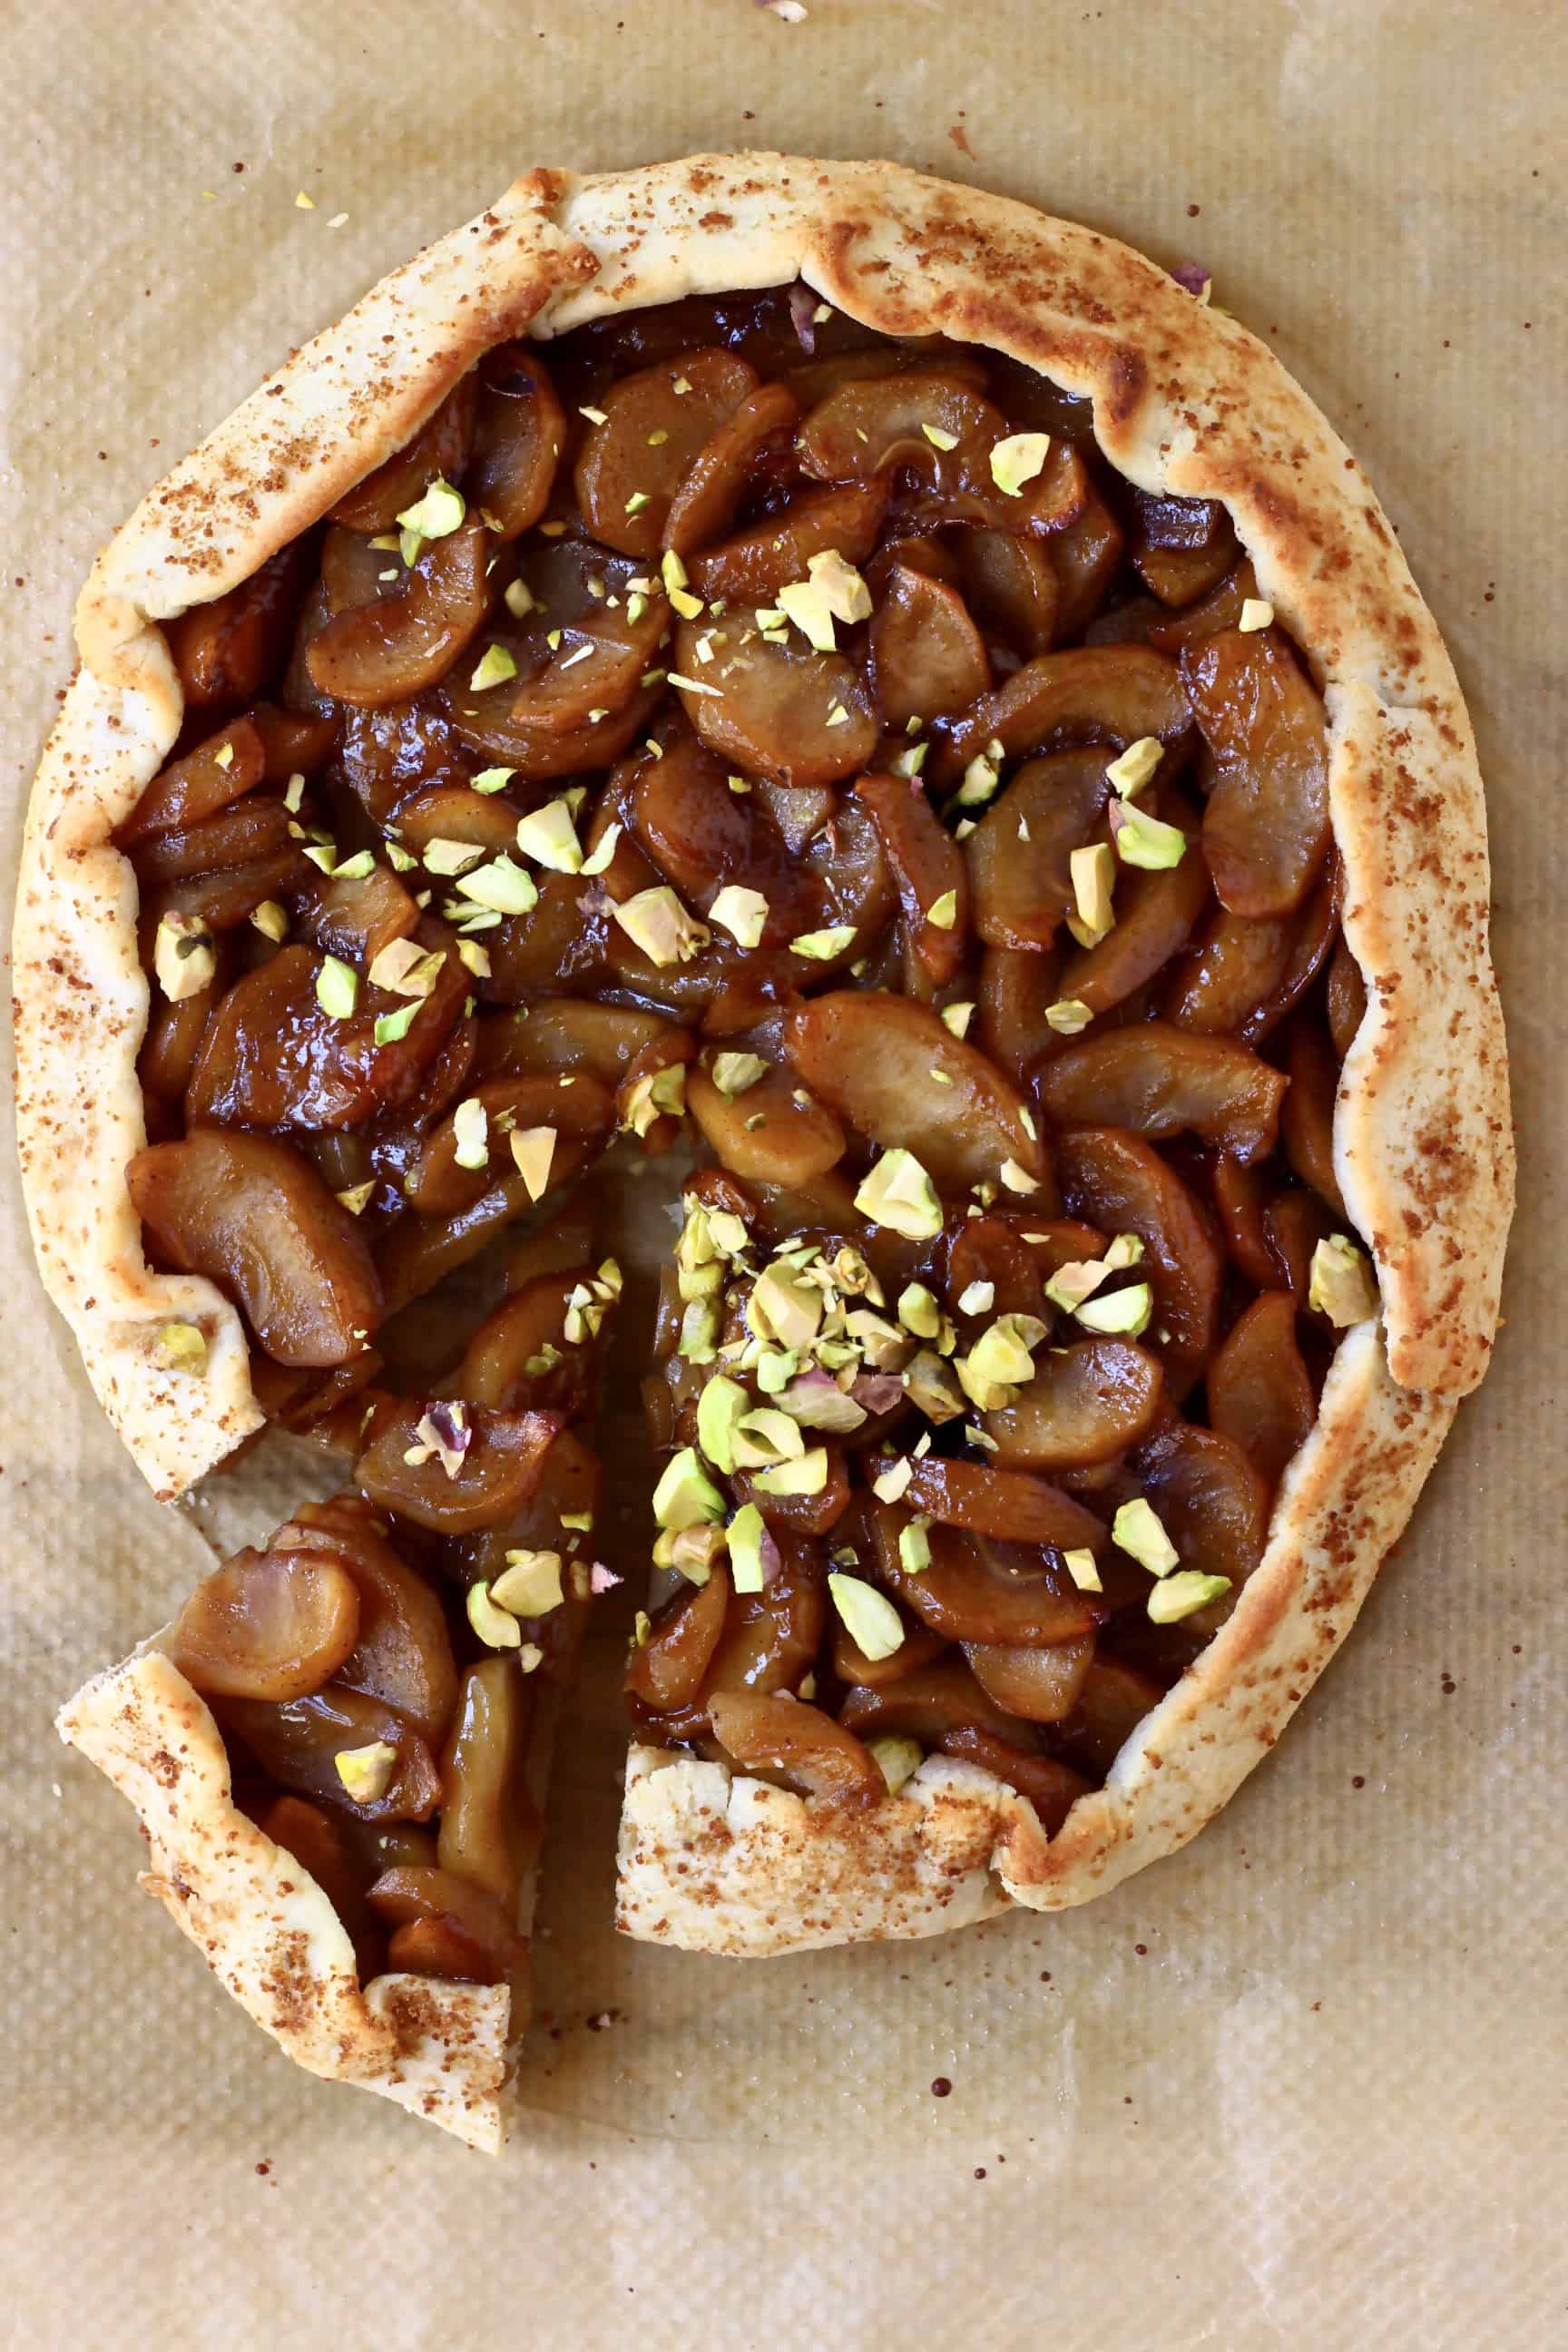 A round galette filled with brown apples sprinkled with pistachio nuts against a sheet of brown baking paper